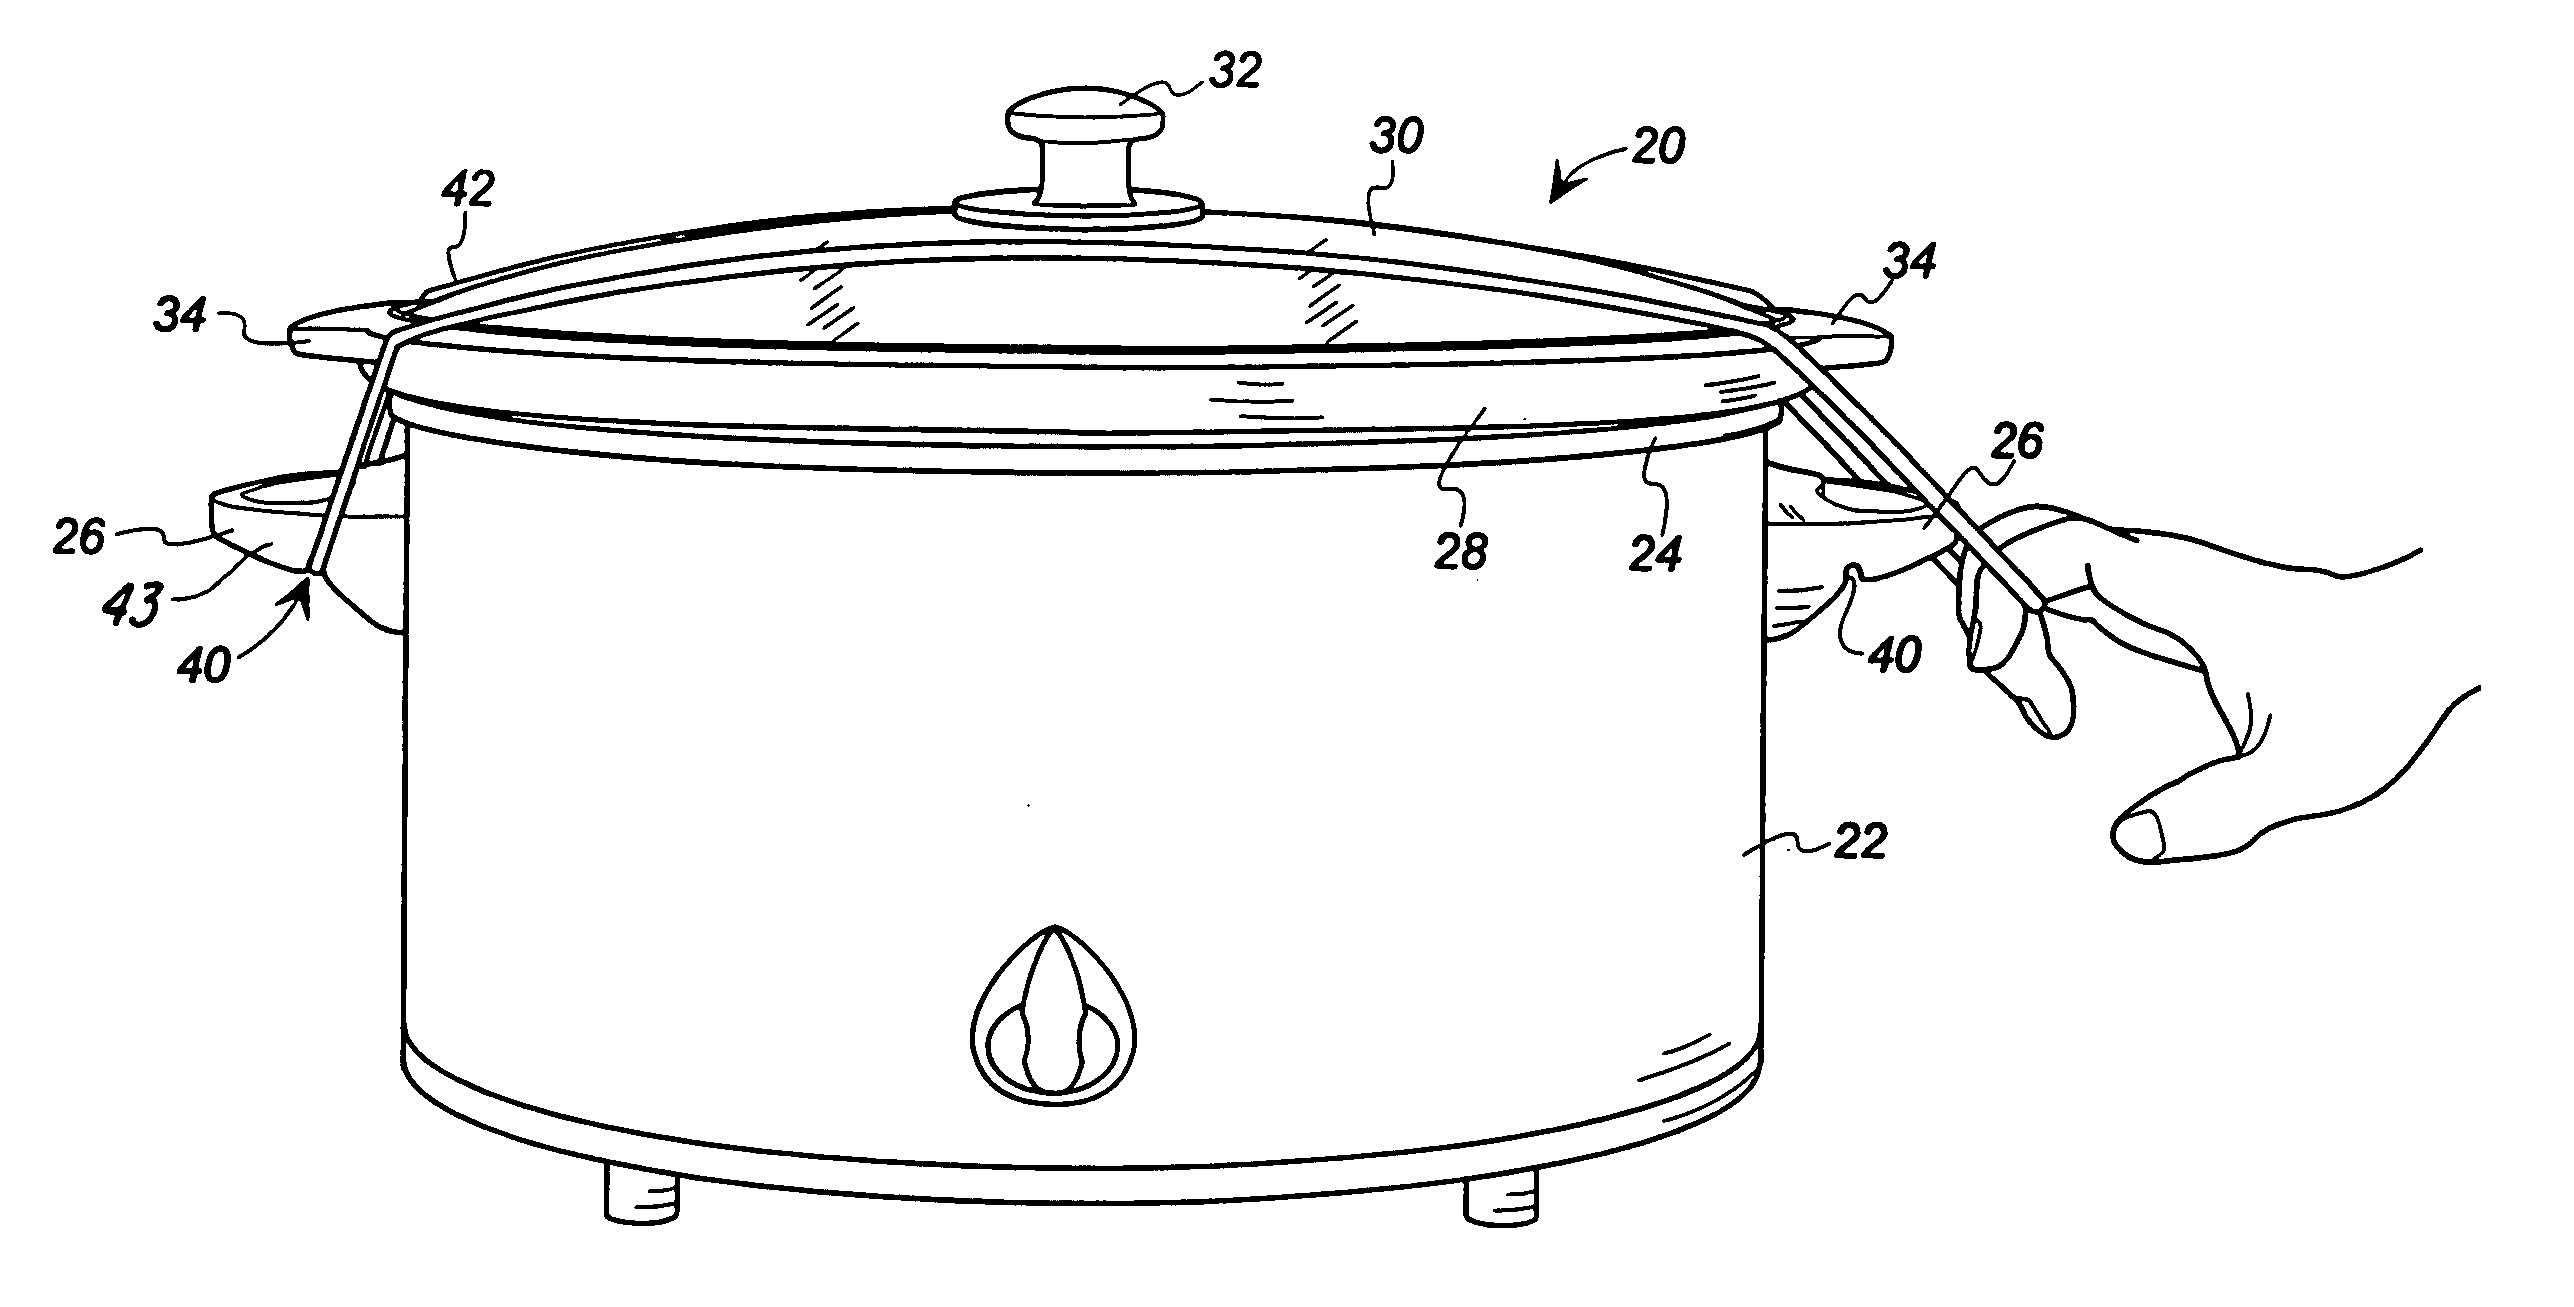 Slow cooker with lid clamp